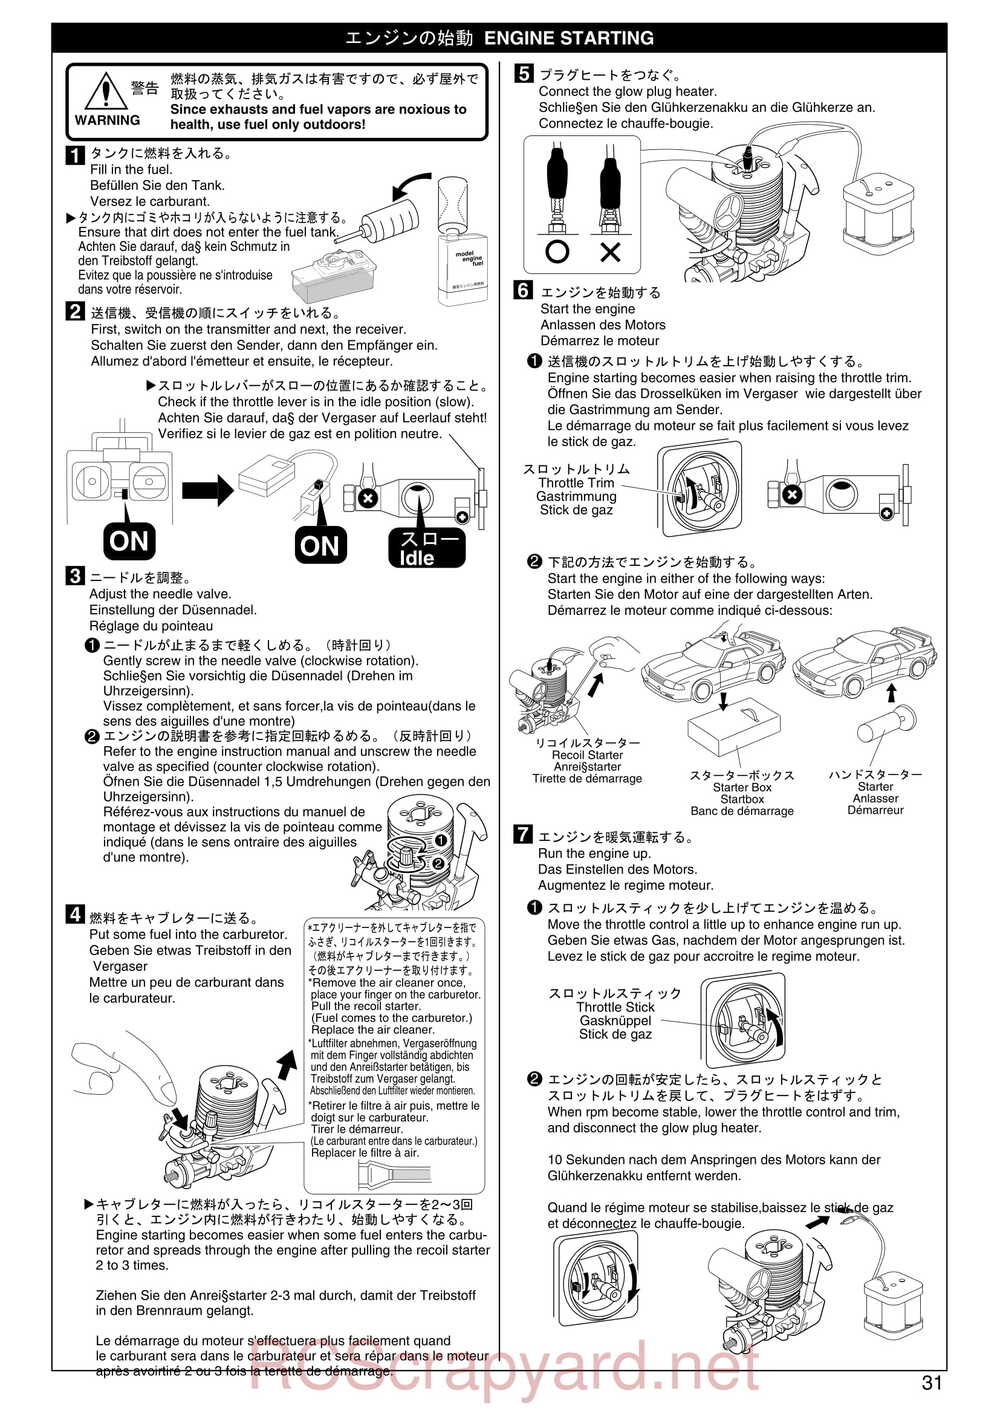 Kyosho - 31241 - V-One-S - Manual - Page 31